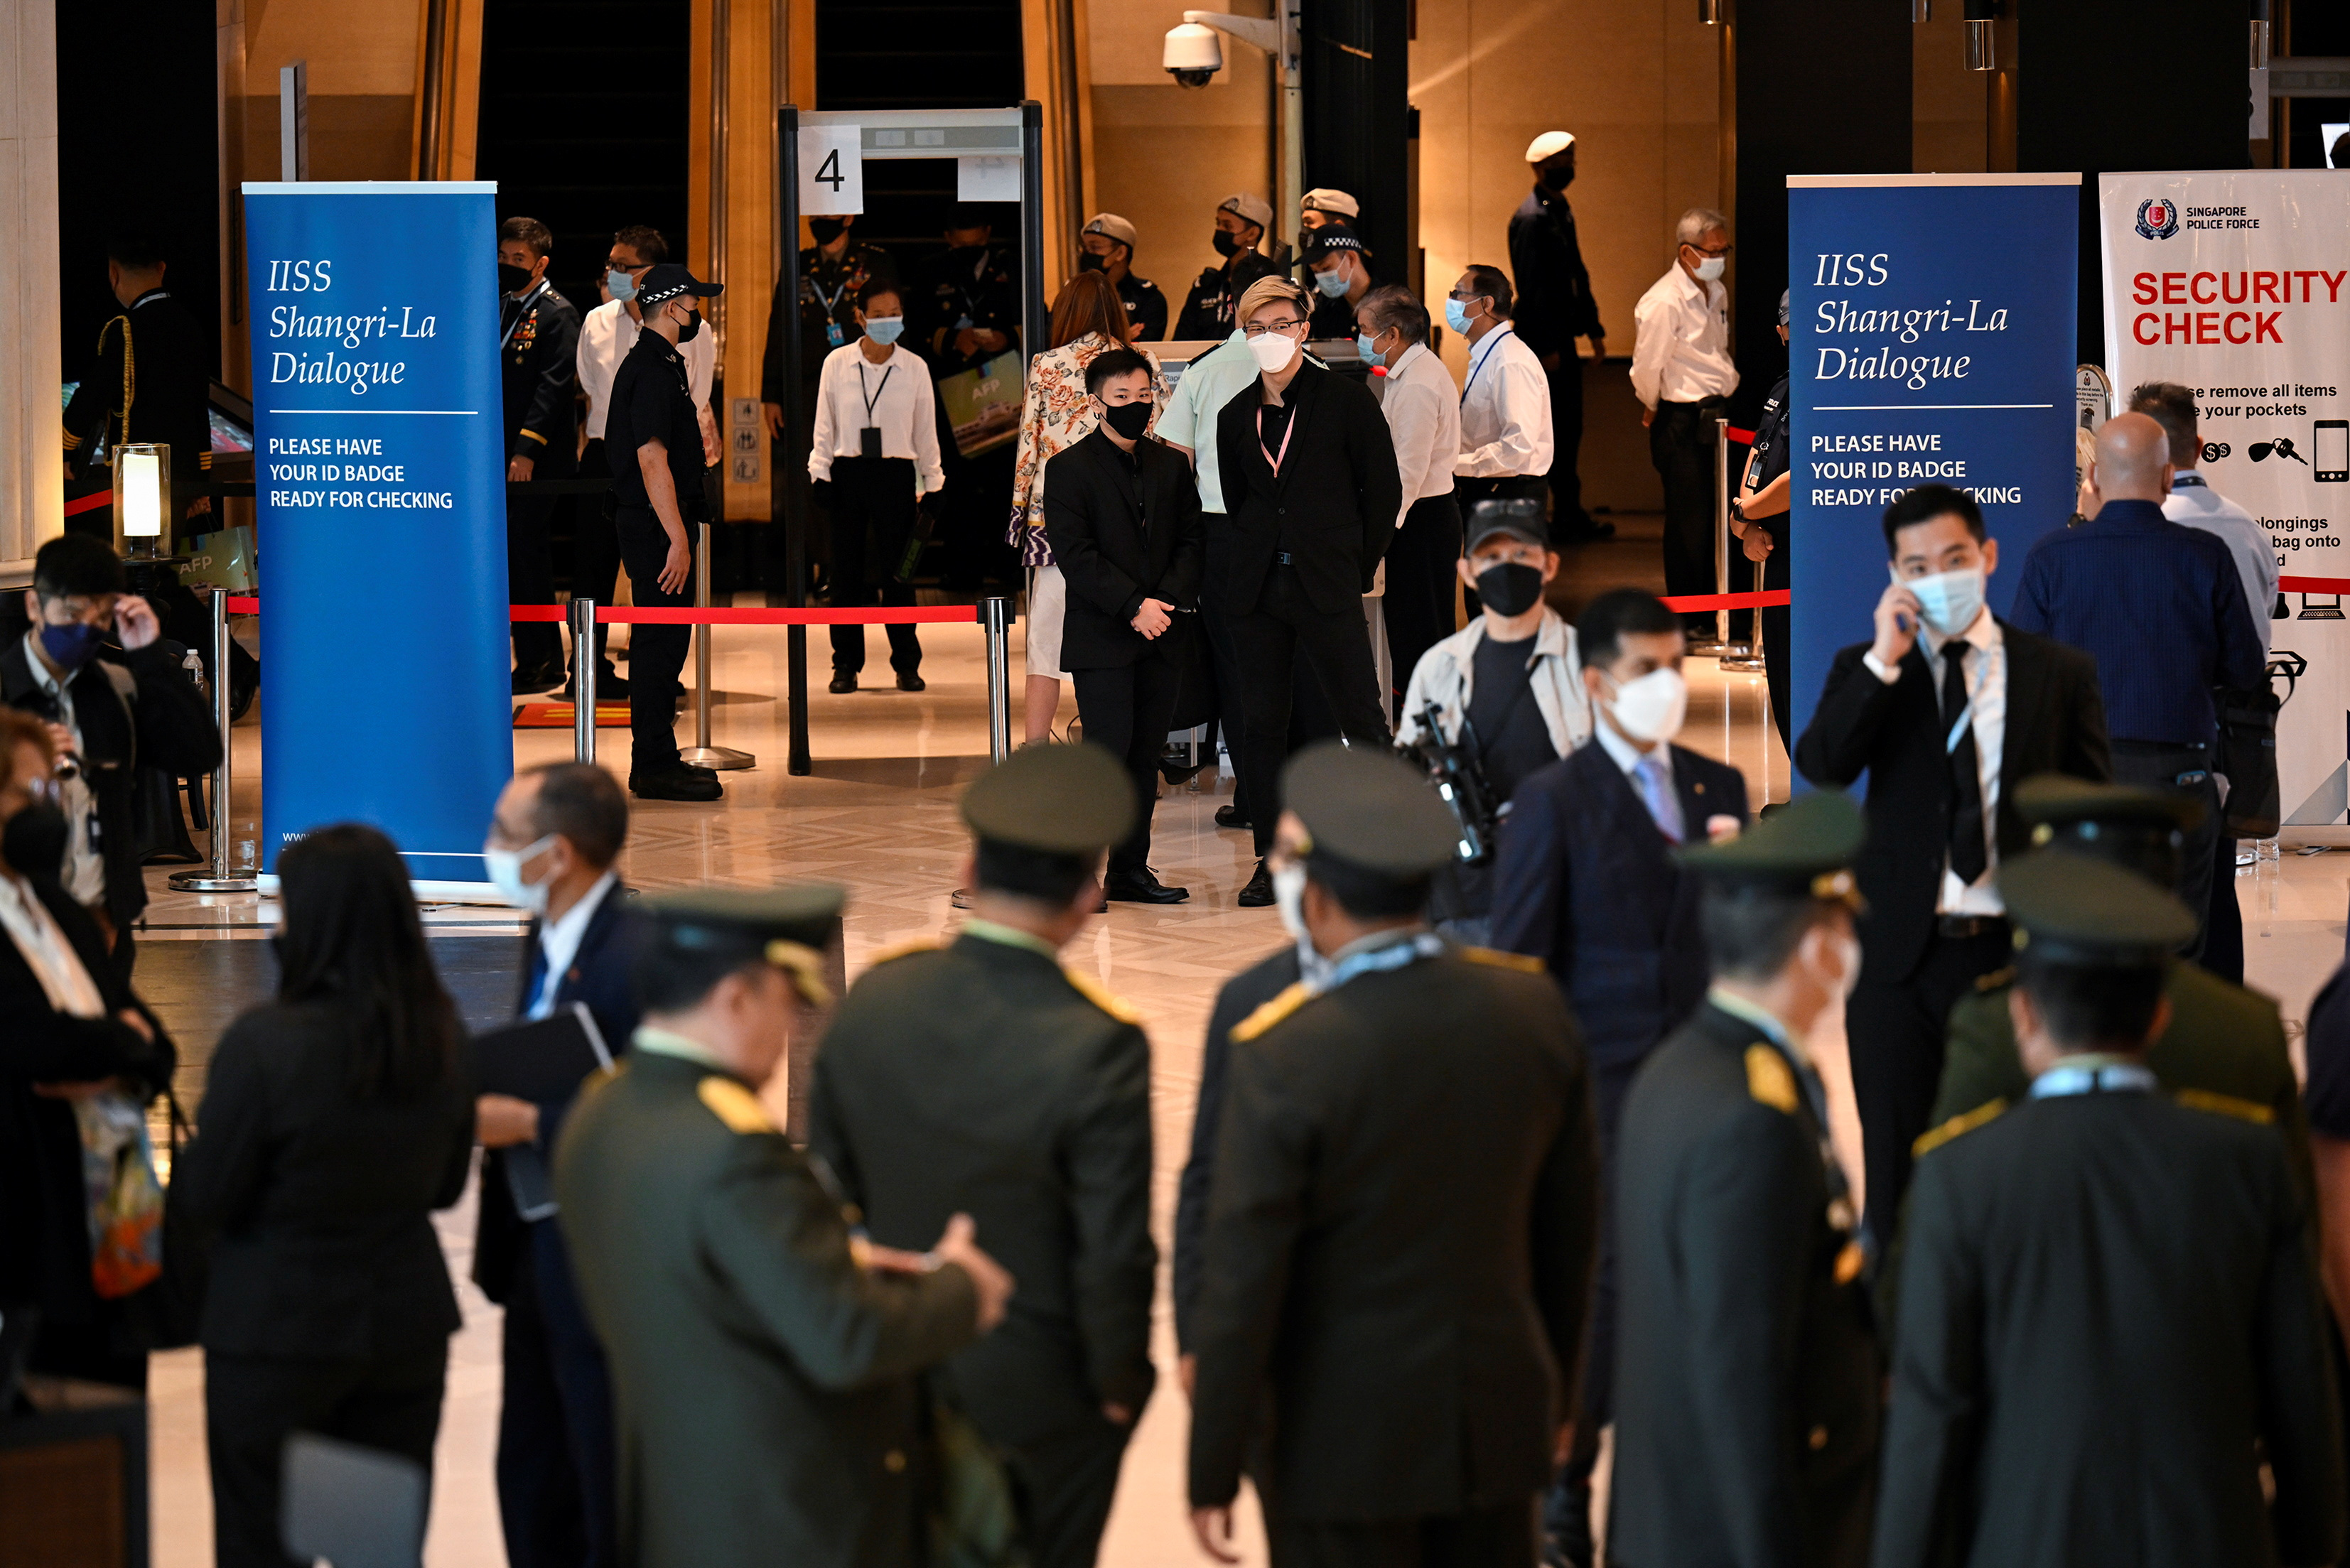 Security checkpoints at the venue of the 19th Shangri-La Dialogue in Singapore